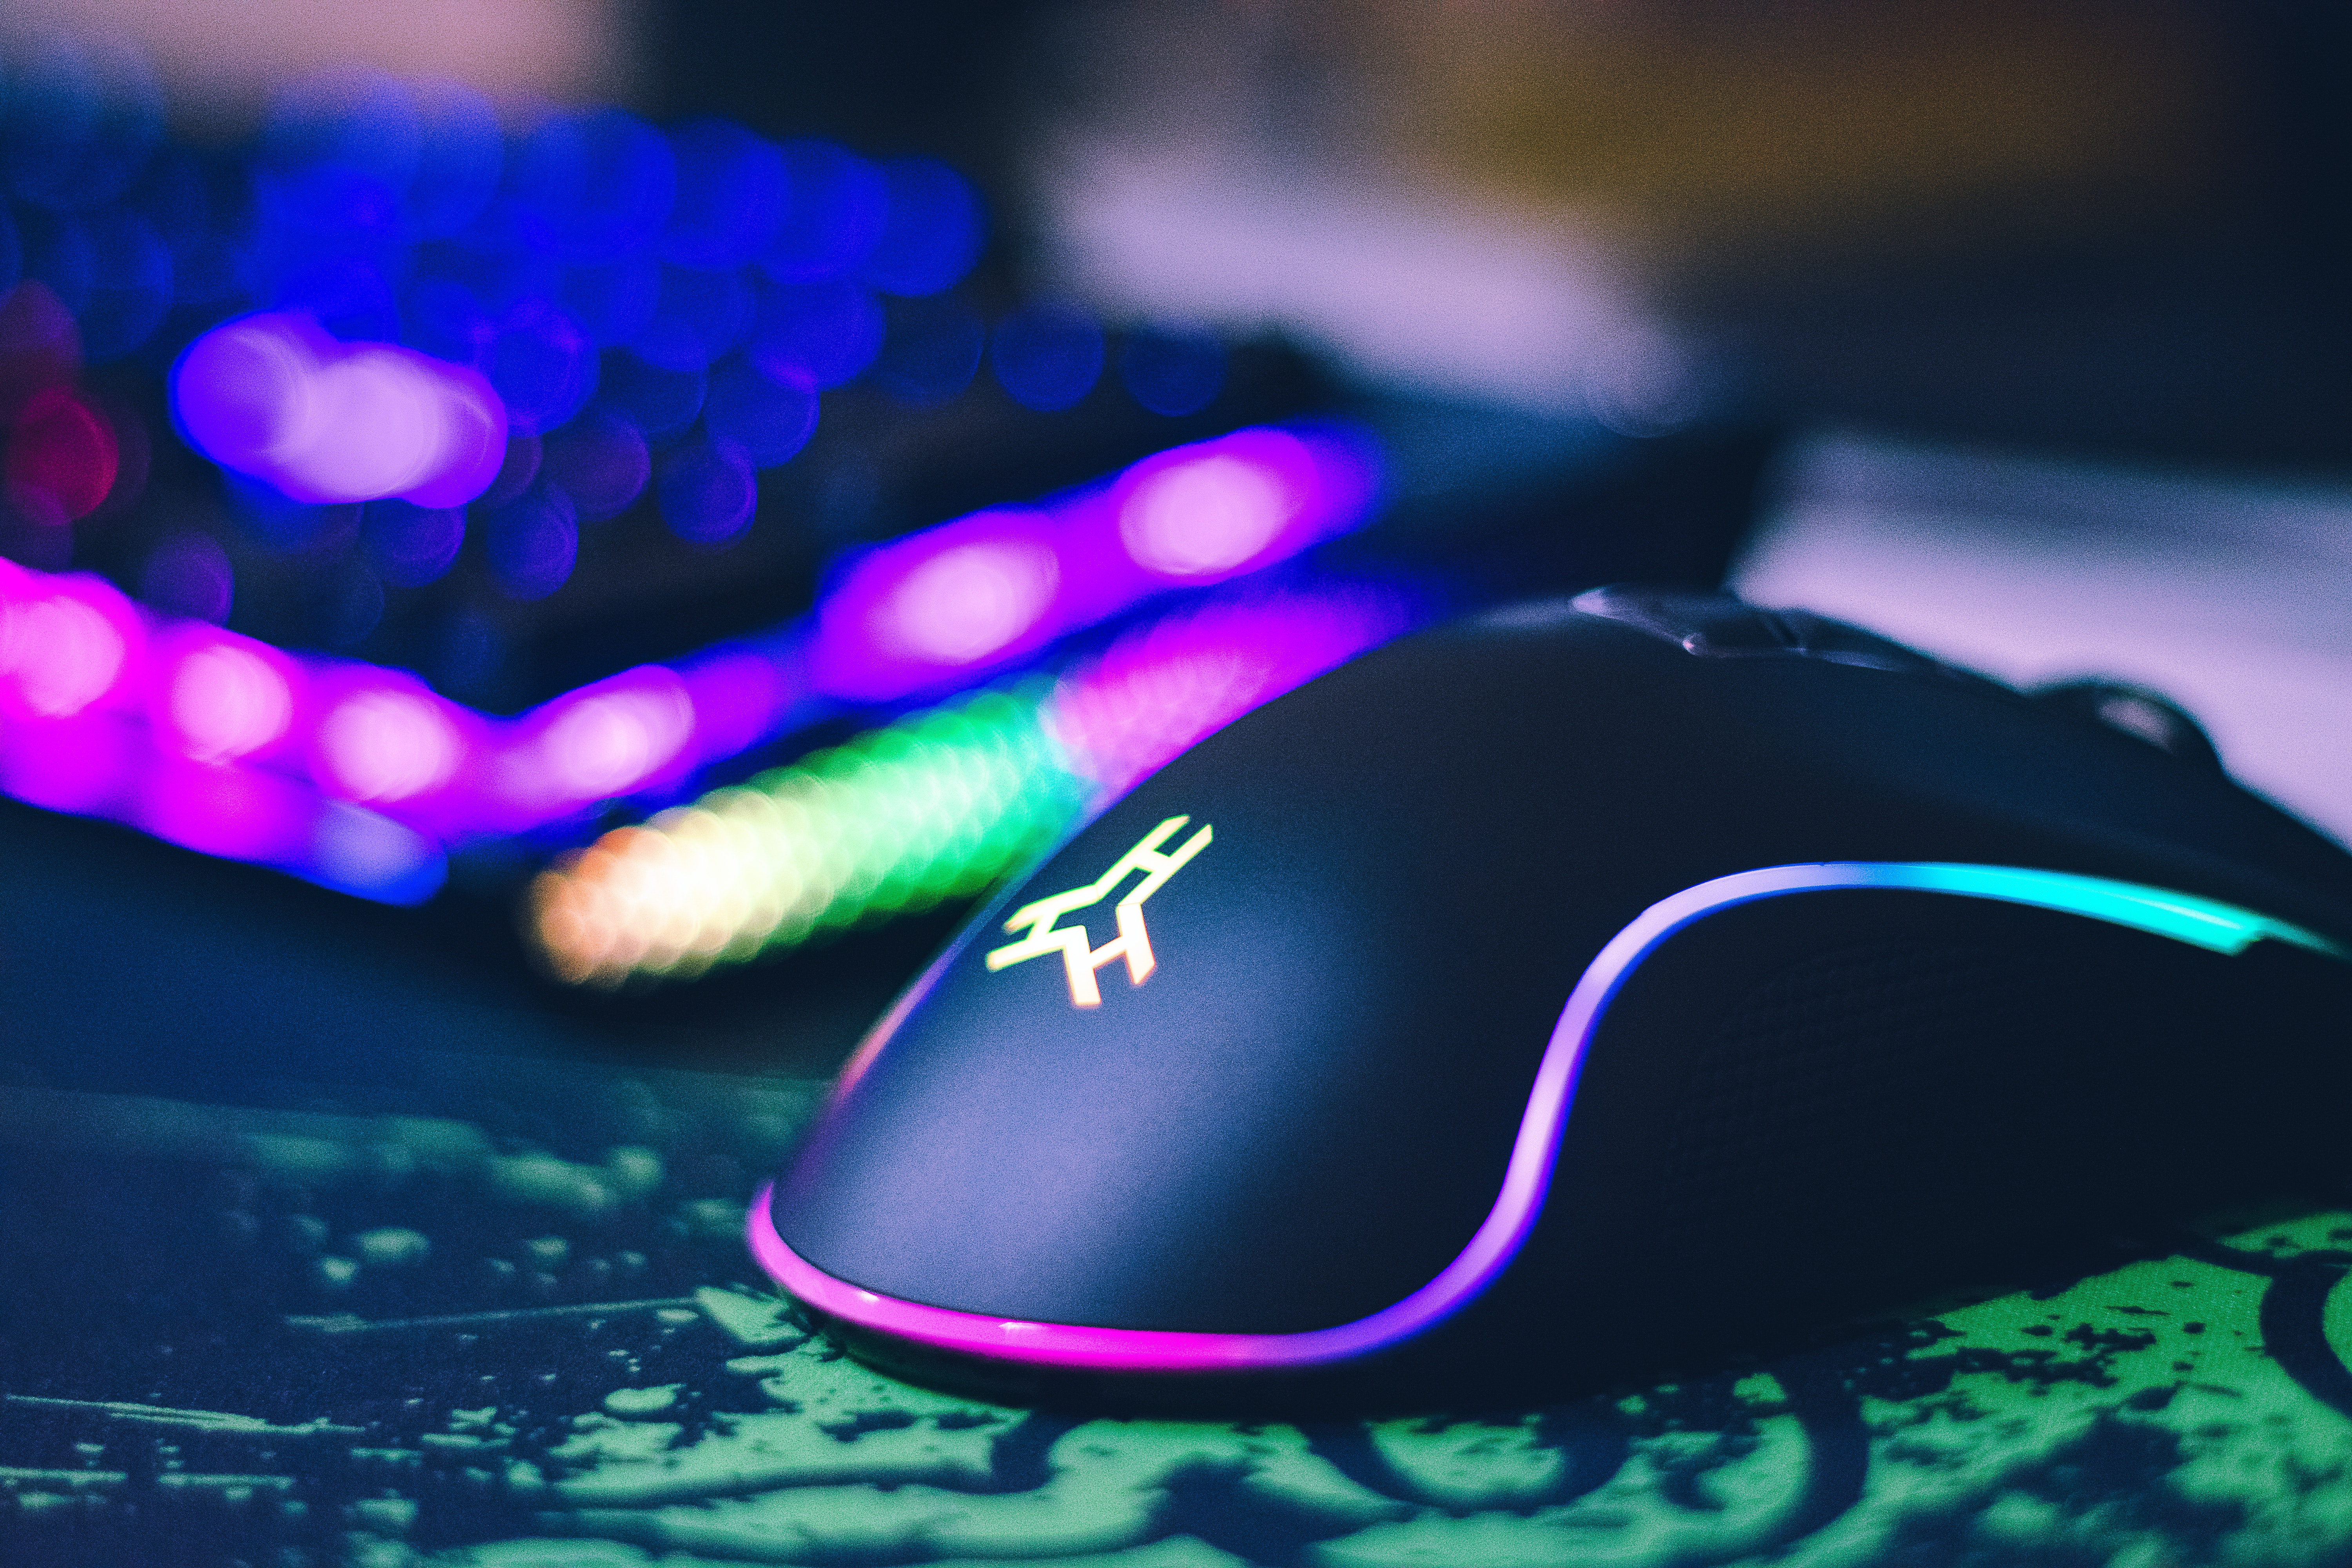 Gaming Mouse Wallpapers